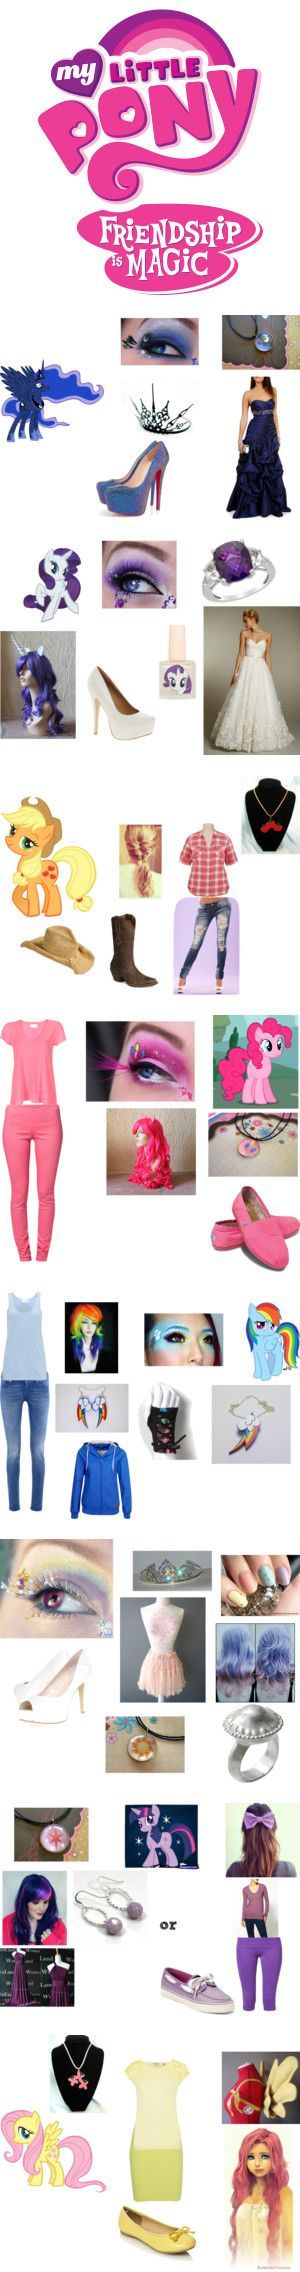 “my little pony friendship is magic” by clarestuber  liked on Polyvore